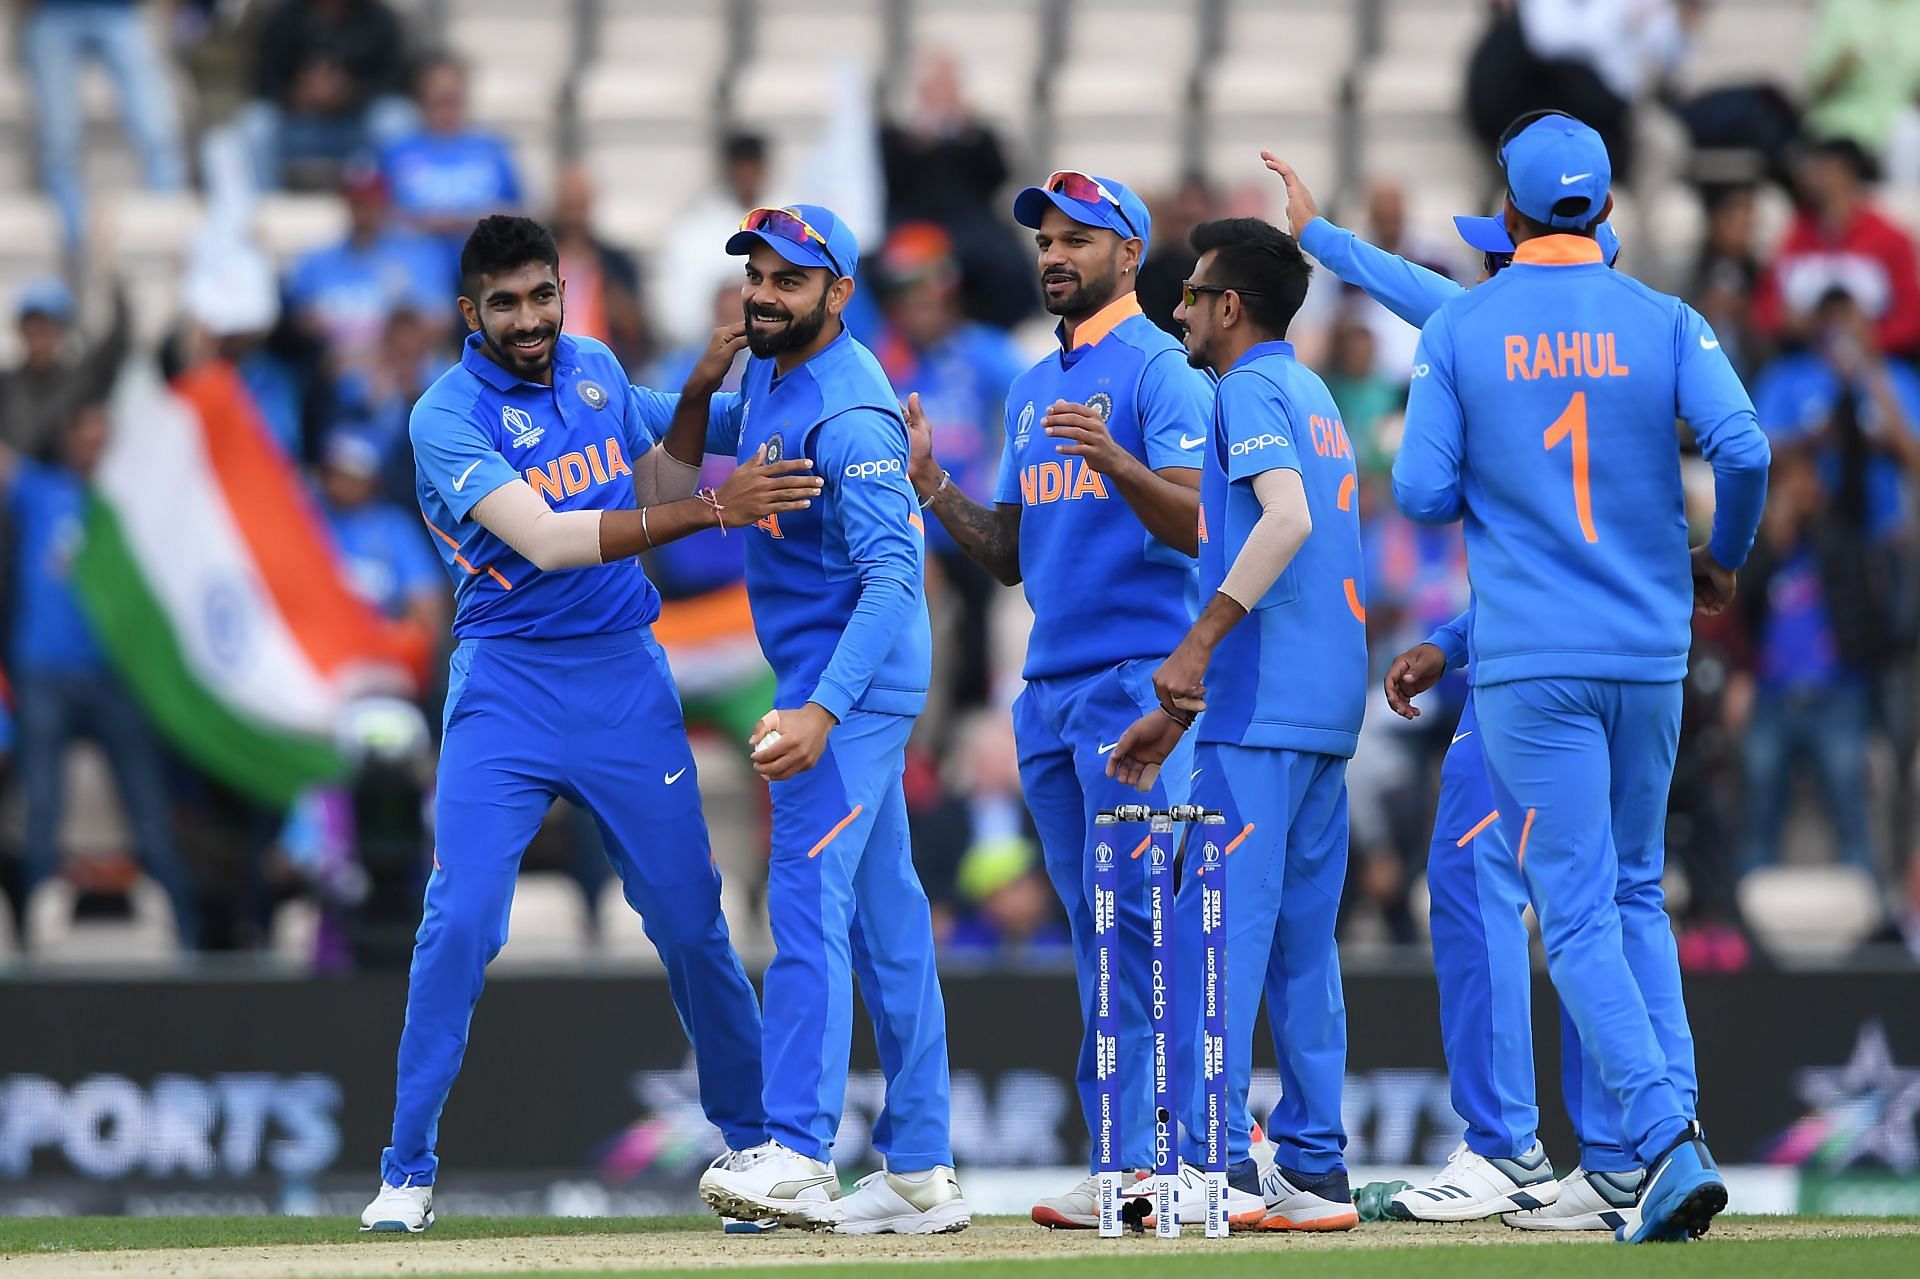 South Africa v India - ICC Cricket World Cup 2019